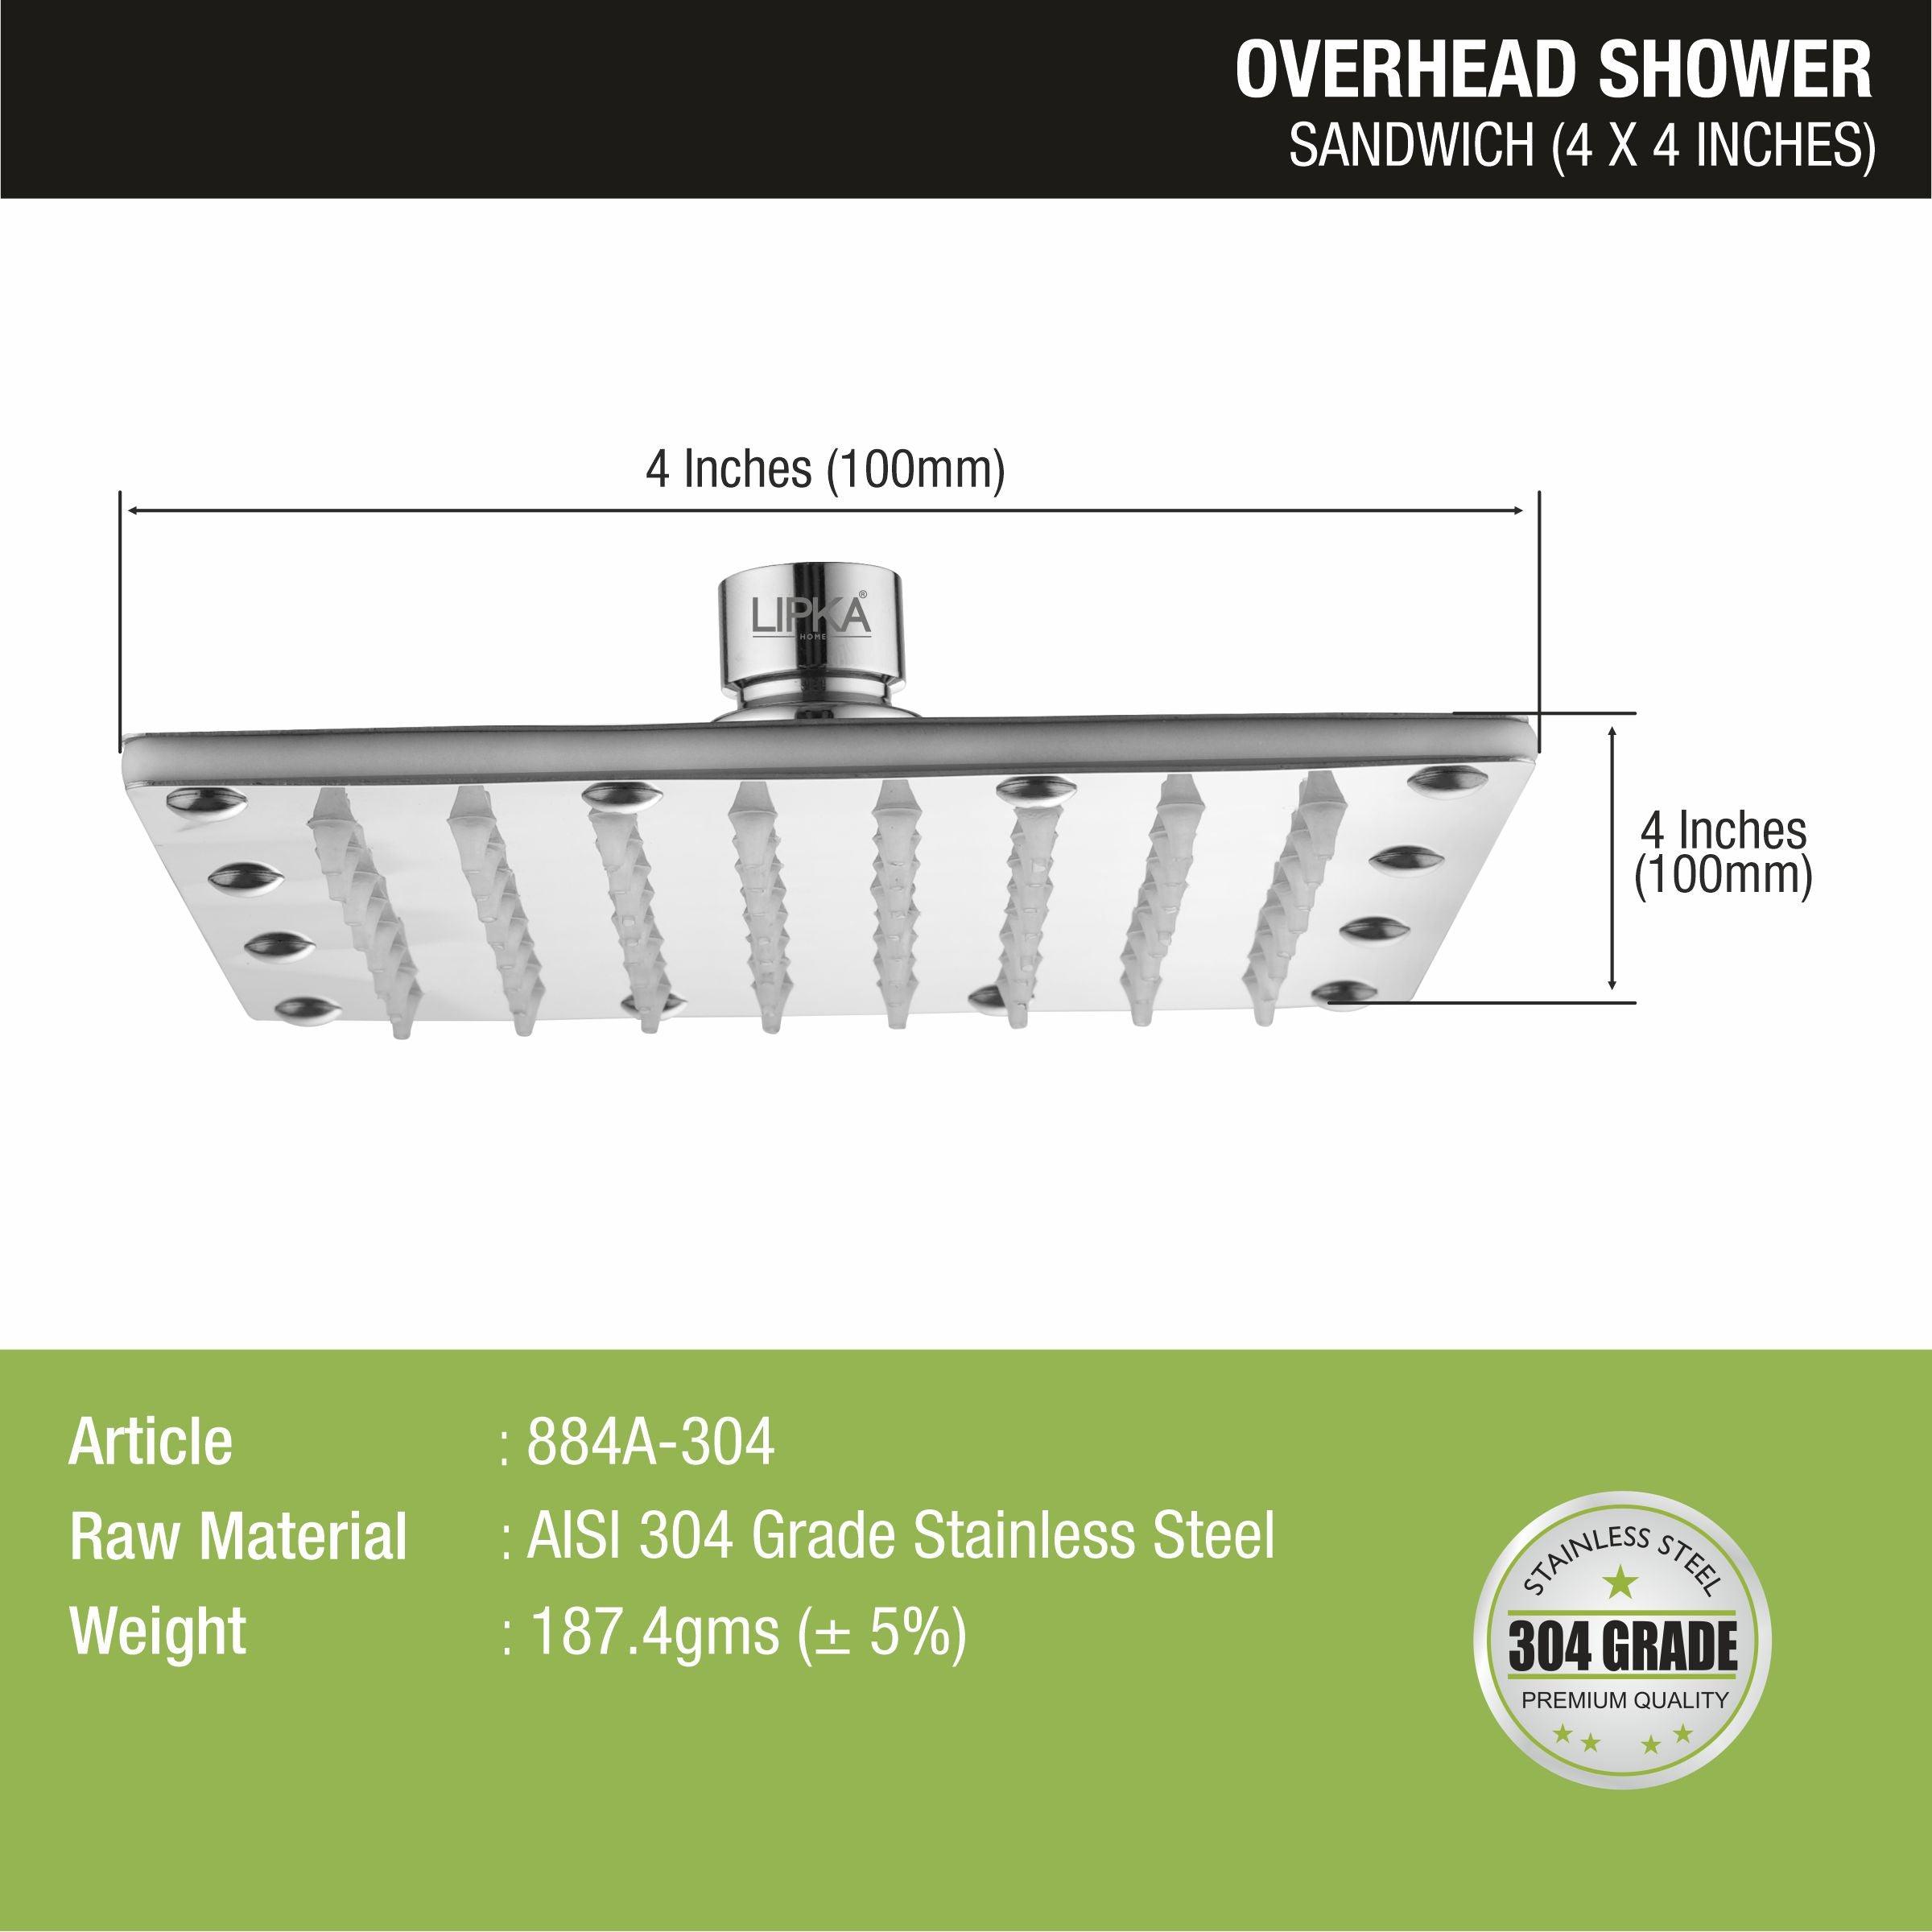 Sandwich 304-Grade Overhead Rain Shower (4 x 4 Inches) sizes and dimensions